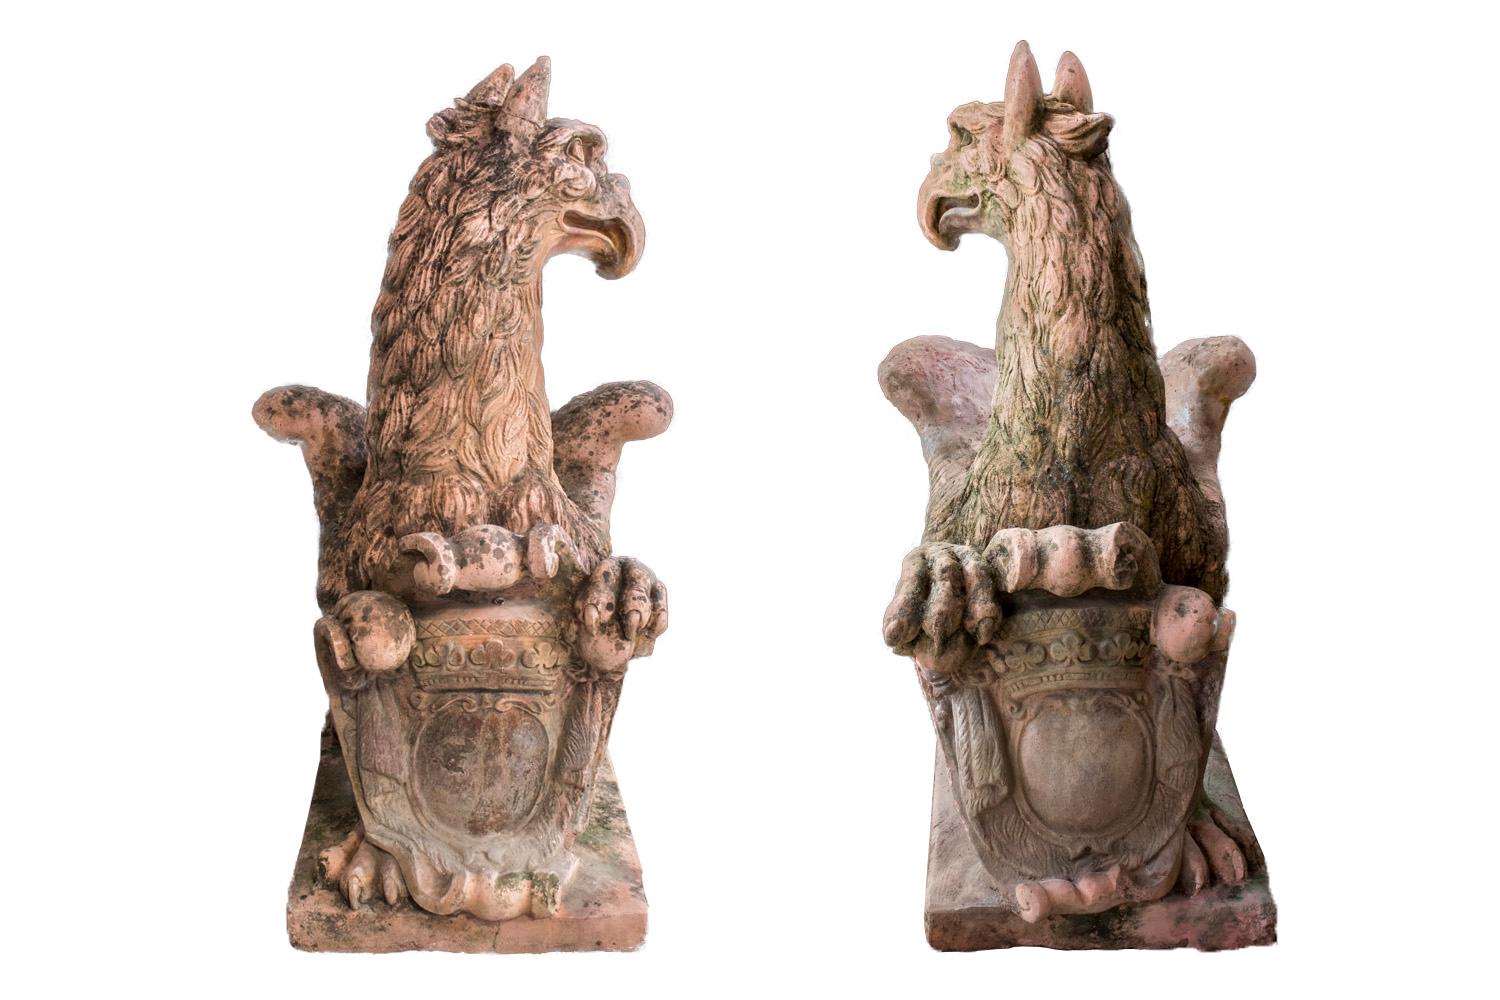 Pair of large griffons in reconstituted stone in terracotta manner. They have lion paws and tail, eagle wings and head with horse ears. They are in squat position on they back legs, folded wings along their back, turned head on side et front legs